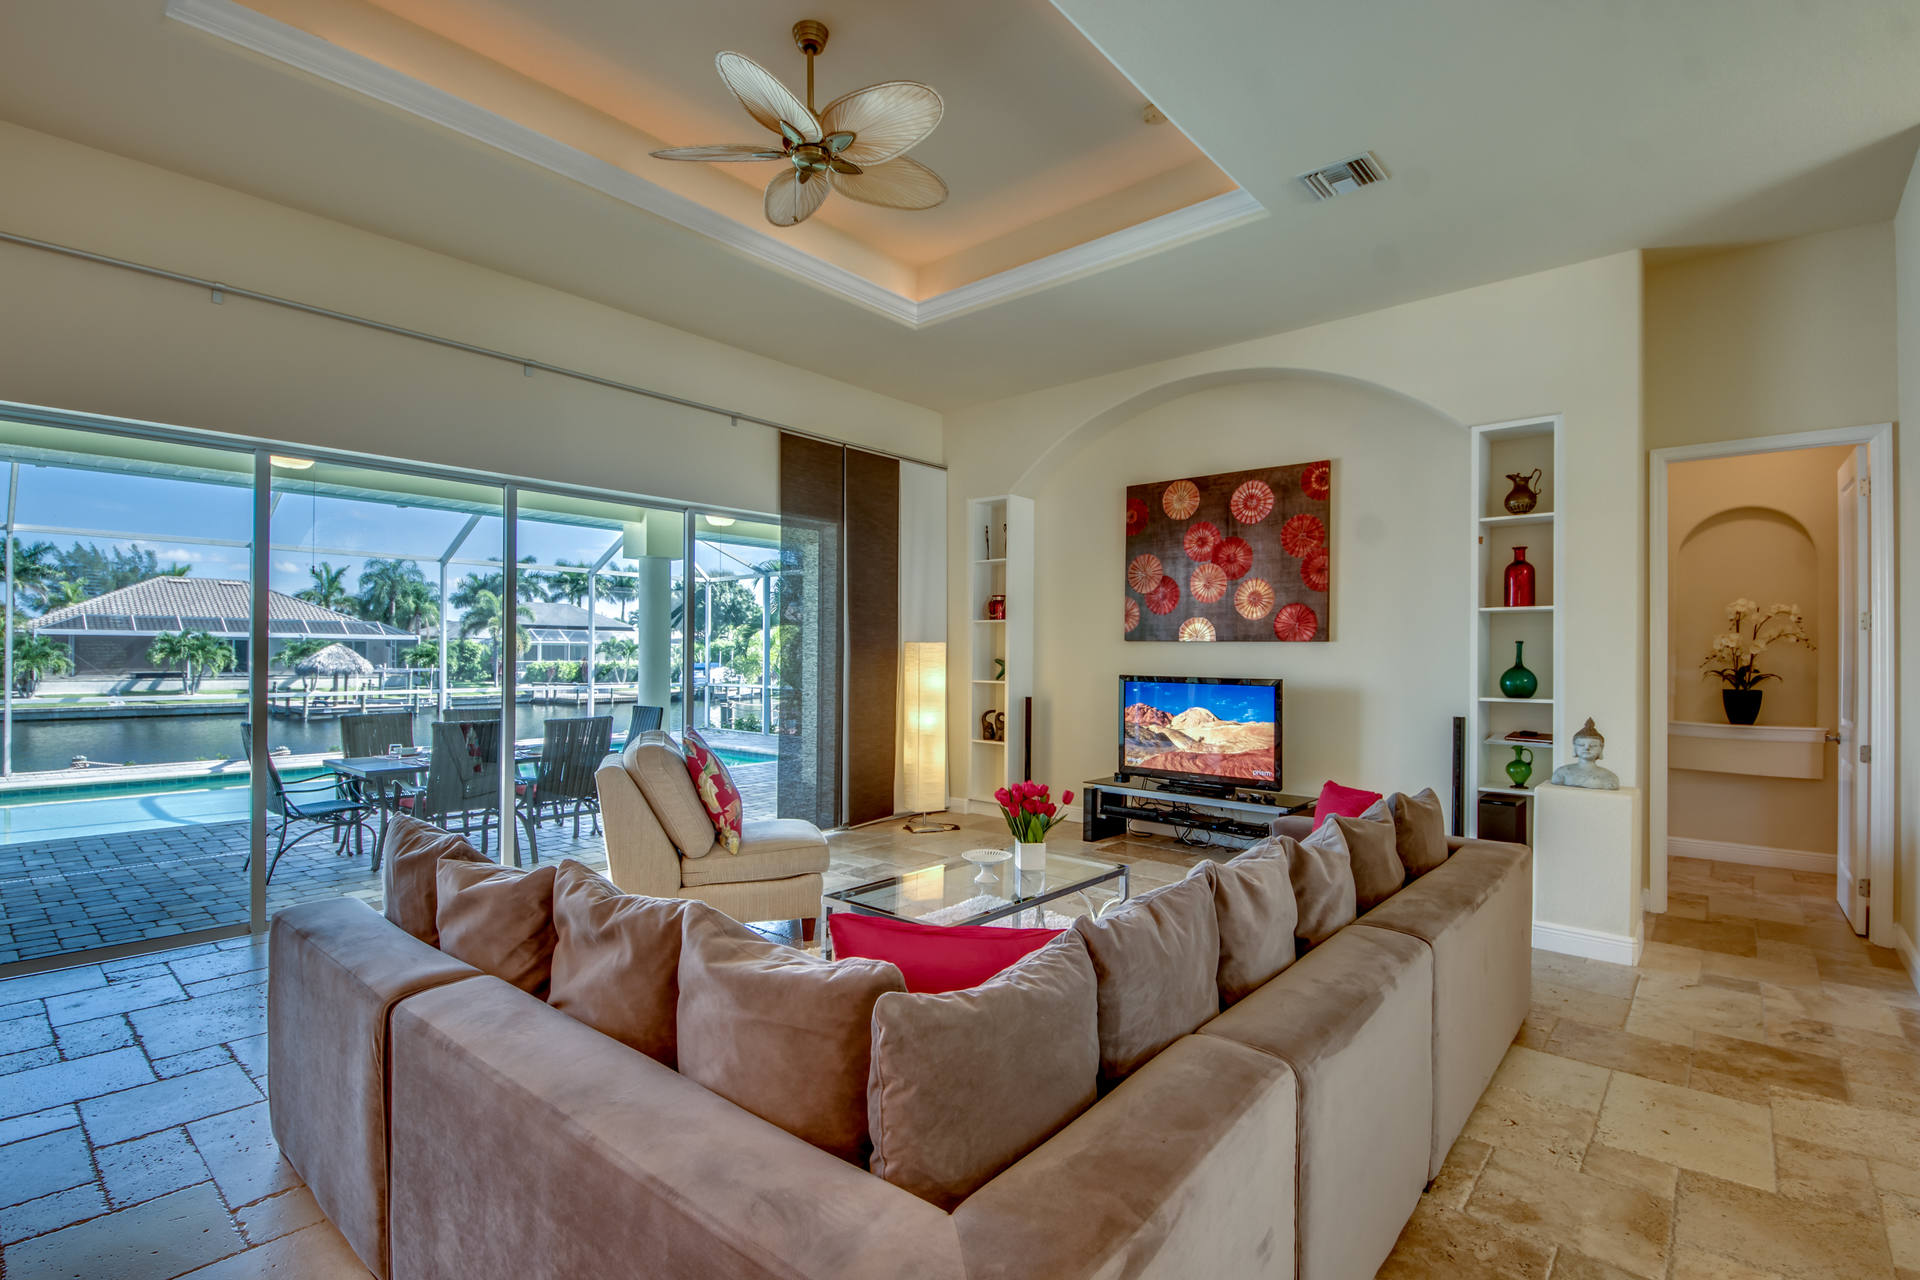 Living room in Florida